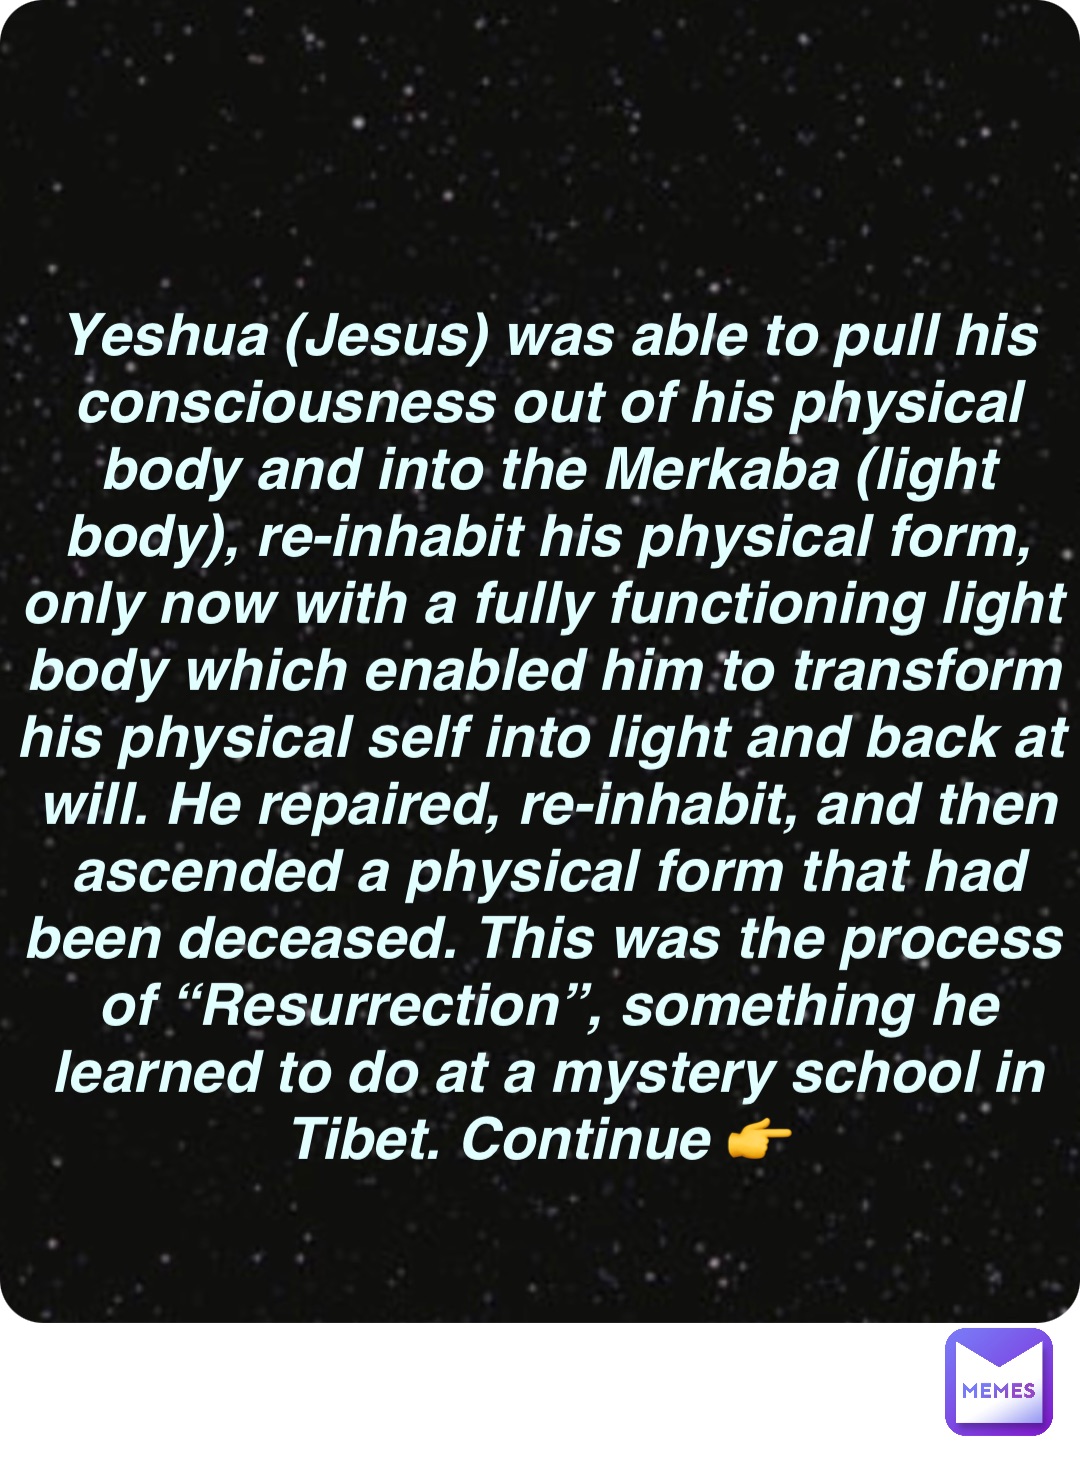 Double tap to edit Yeshua (Jesus) was able to pull his consciousness out of his physical body and into the Merkaba (light body), re-inhabit his physical form, only now with a fully functioning light body which enabled him to transform his physical self into light and back at will. He repaired, re-inhabit, and then ascended a physical form that had been deceased. This was the process of “Resurrection”, something he learned to do at a mystery school in Tibet. Continue 👉